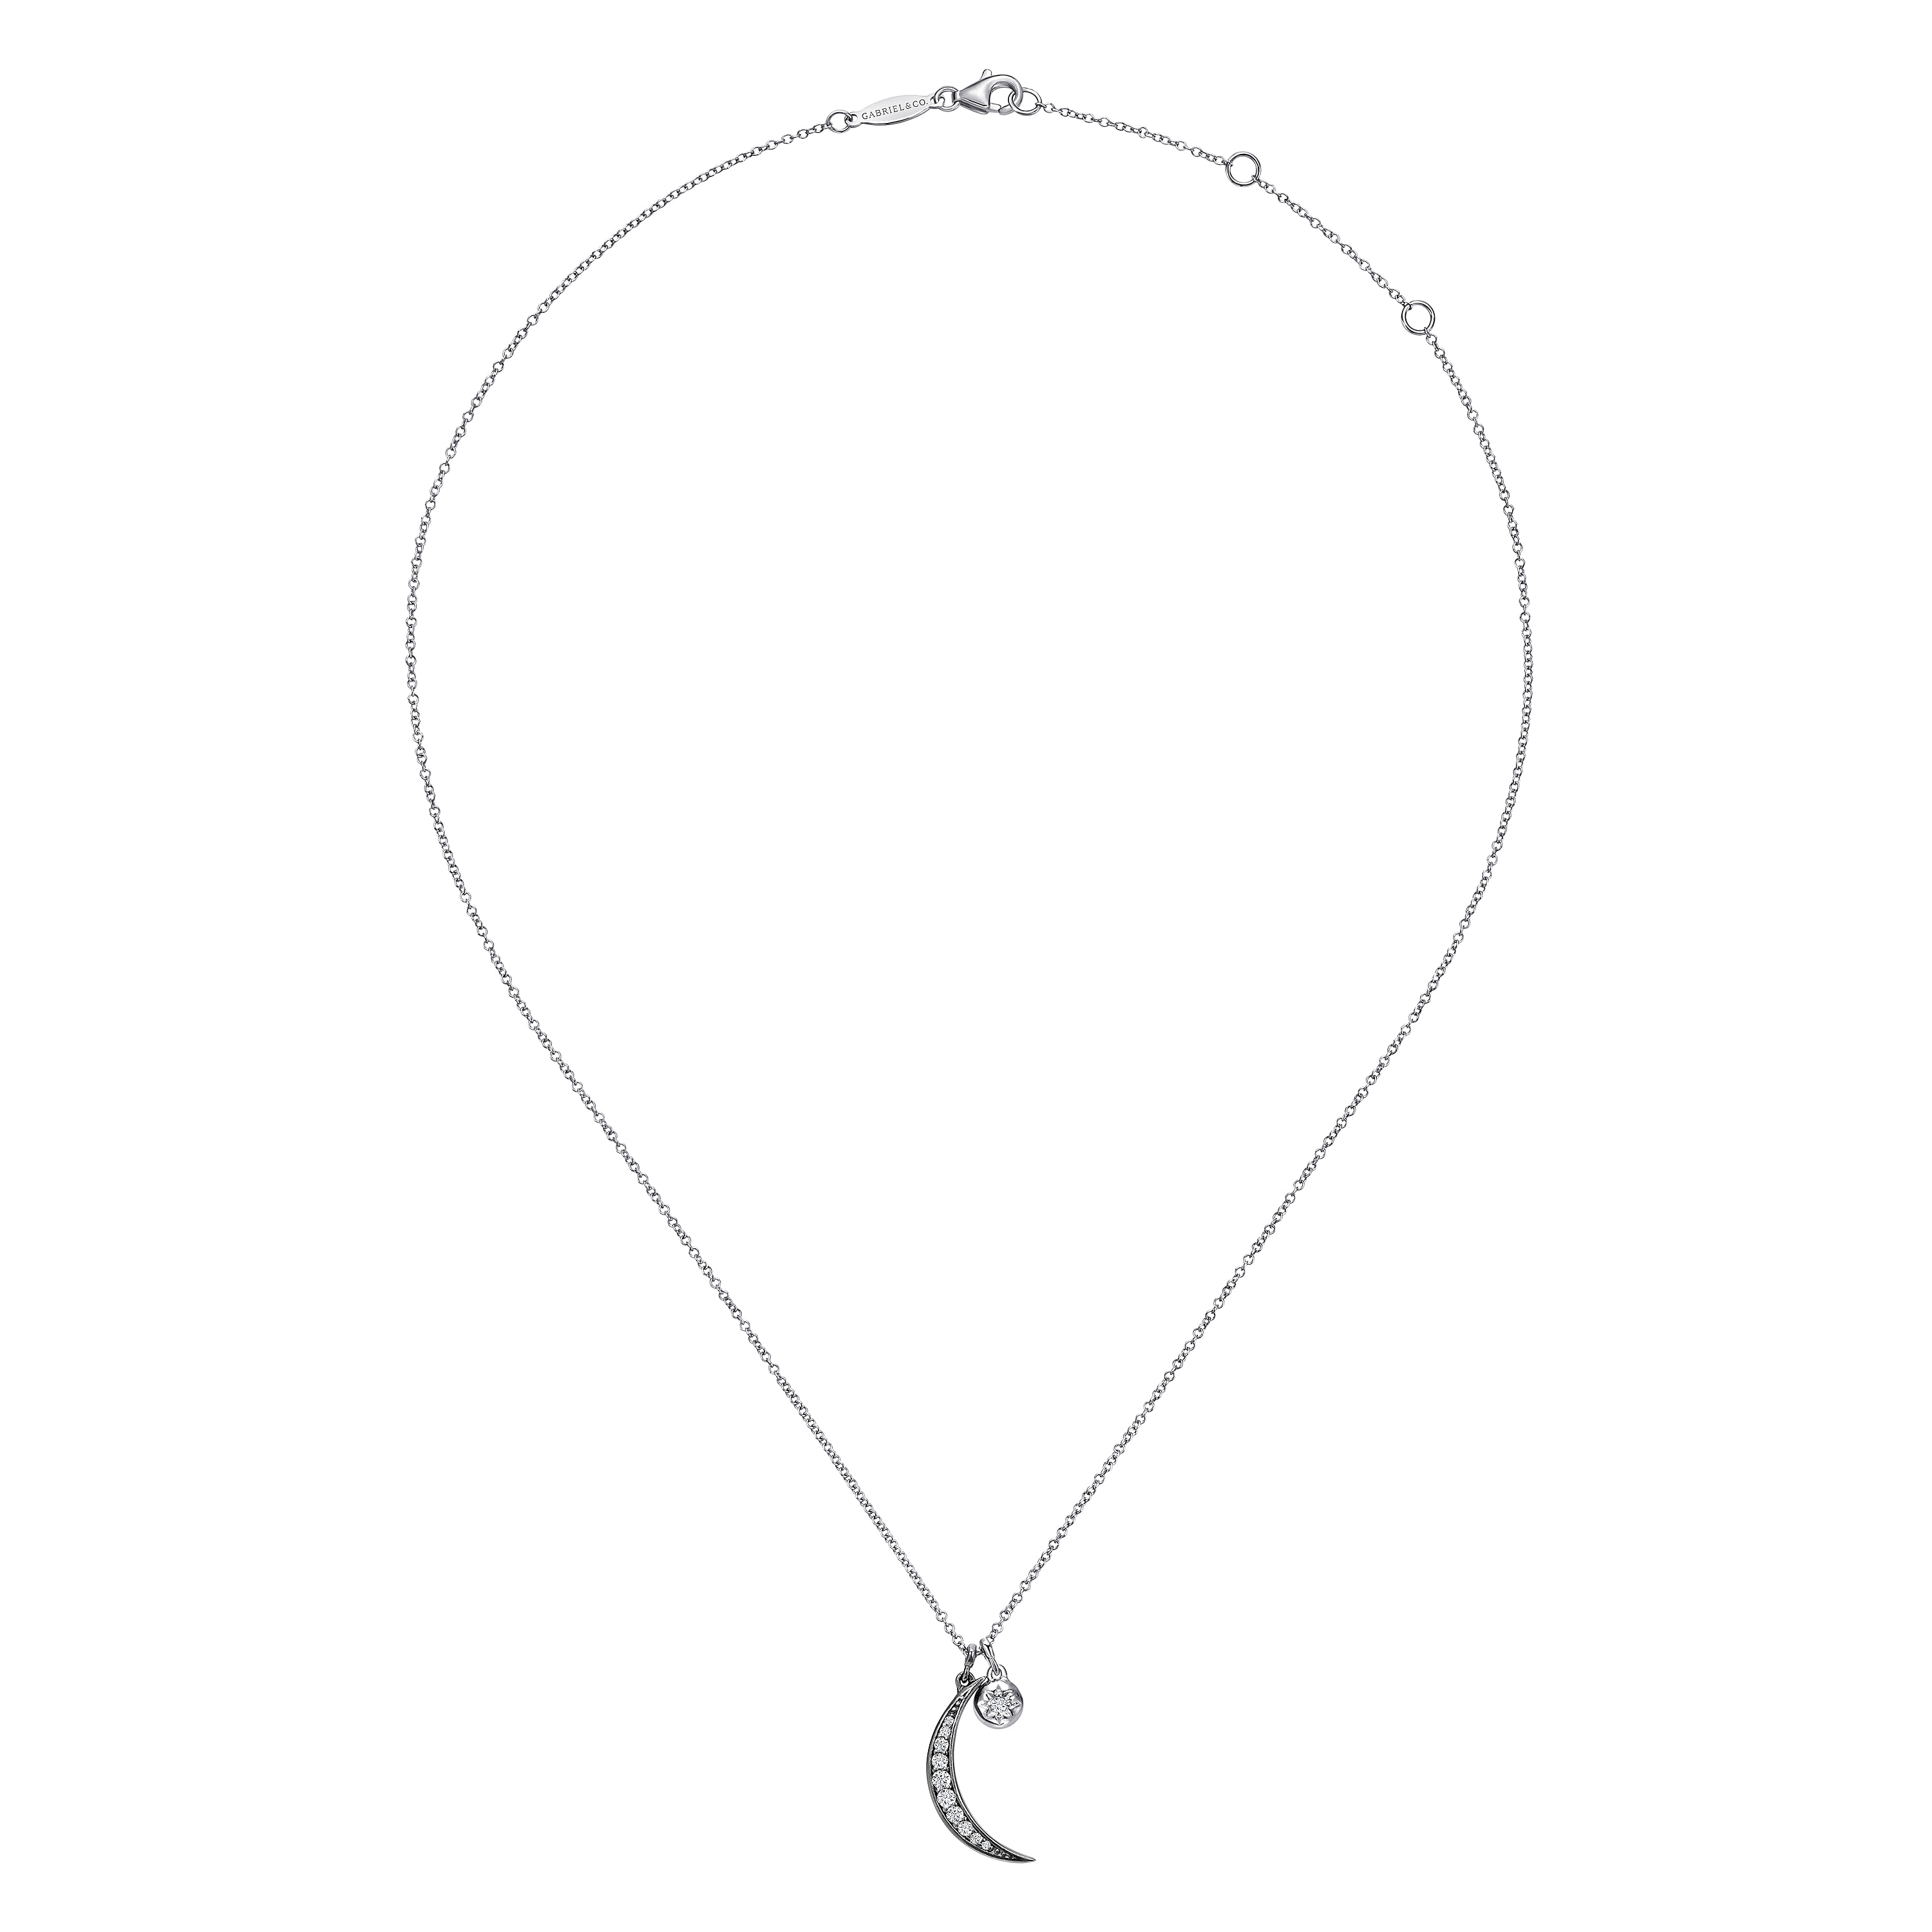 925 Sterling Silver Star and Moon Charm Necklace with White Sapphire - Shot 2